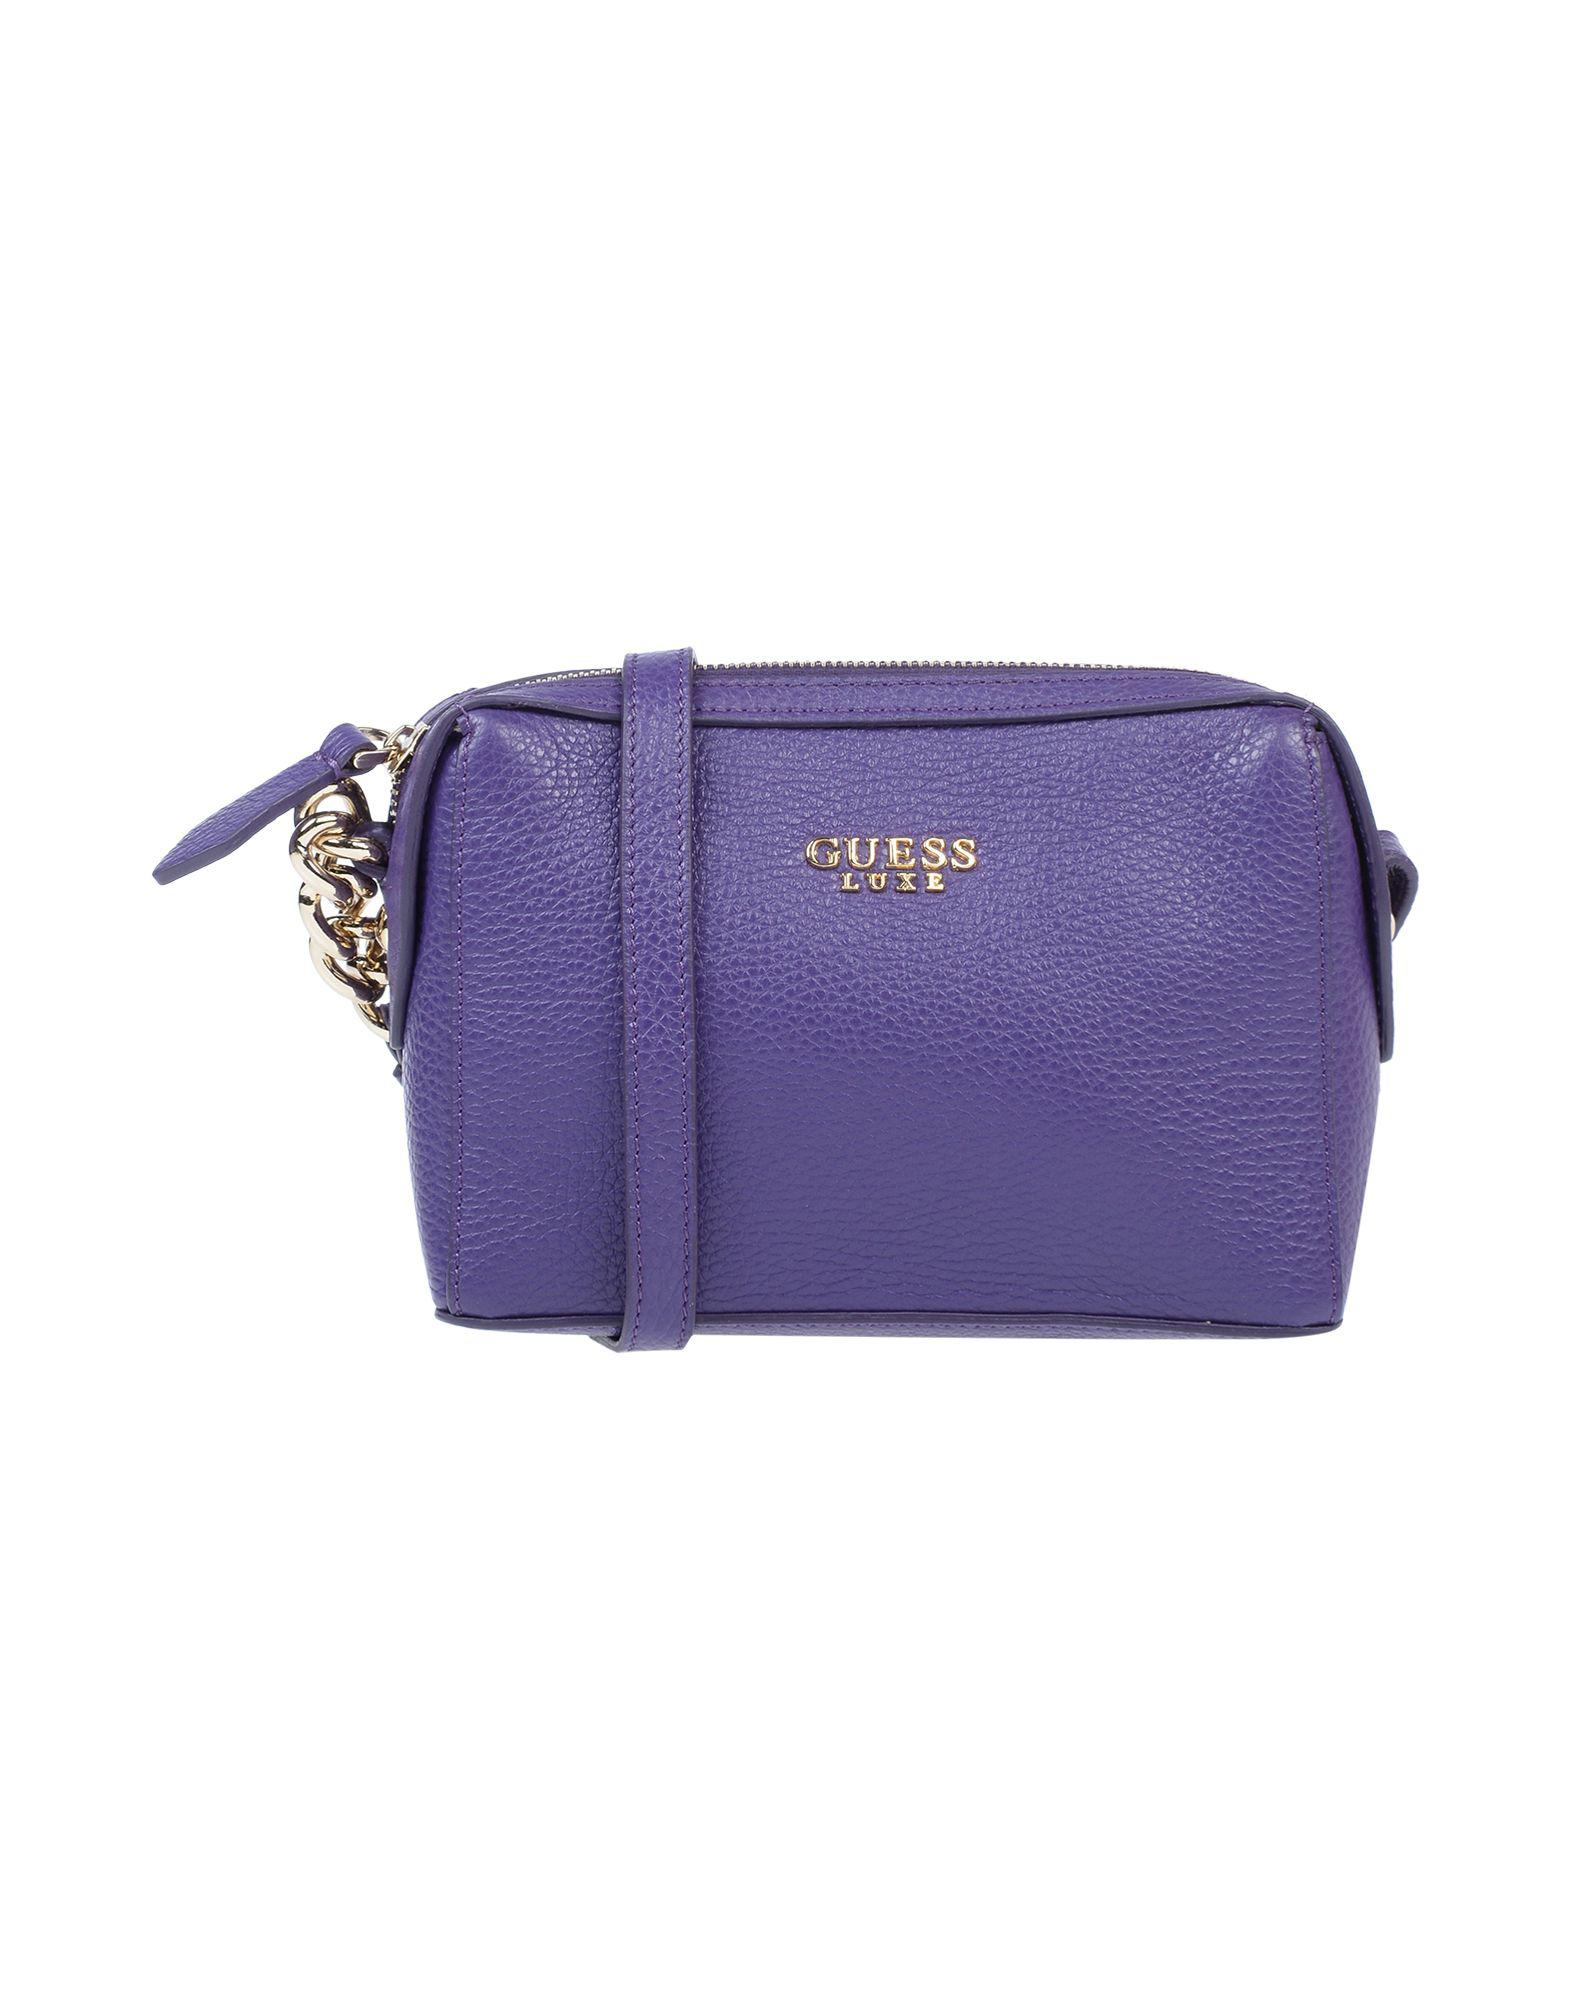 Guess Leather Cross-body Bag in Mauve (Purple) - Lyst